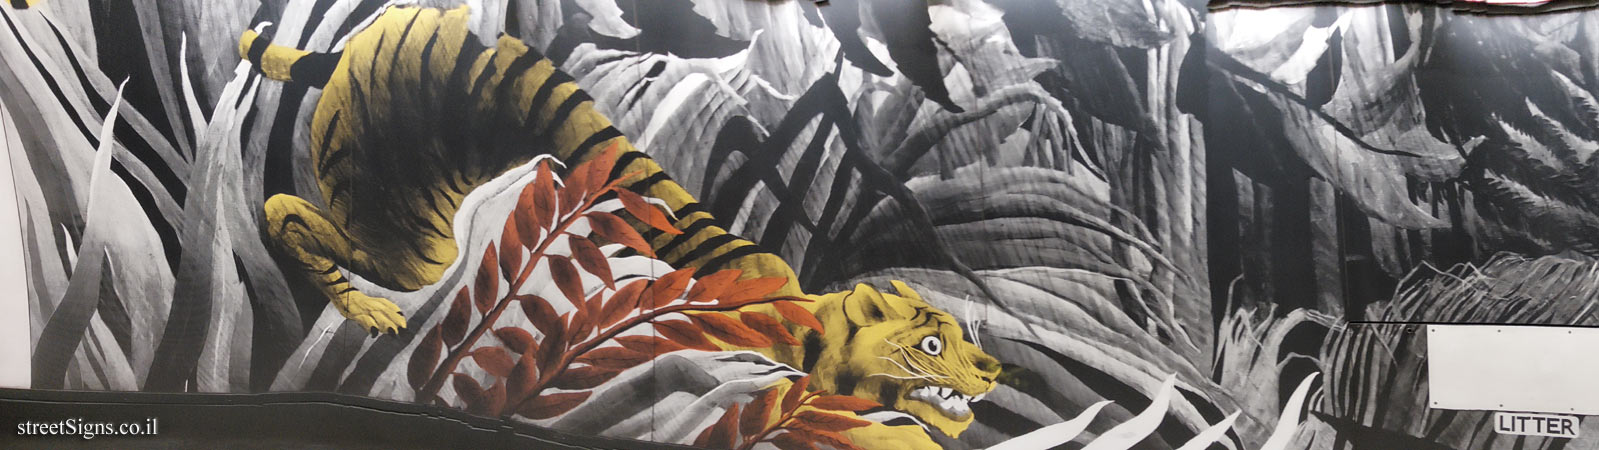 Charing Cross Subway Station - Interior of the station - Tiger in a Tropical Storm or Surprised! by Henri Rousseau- Trafalgar Square / Charing Cross Stn, London, UK